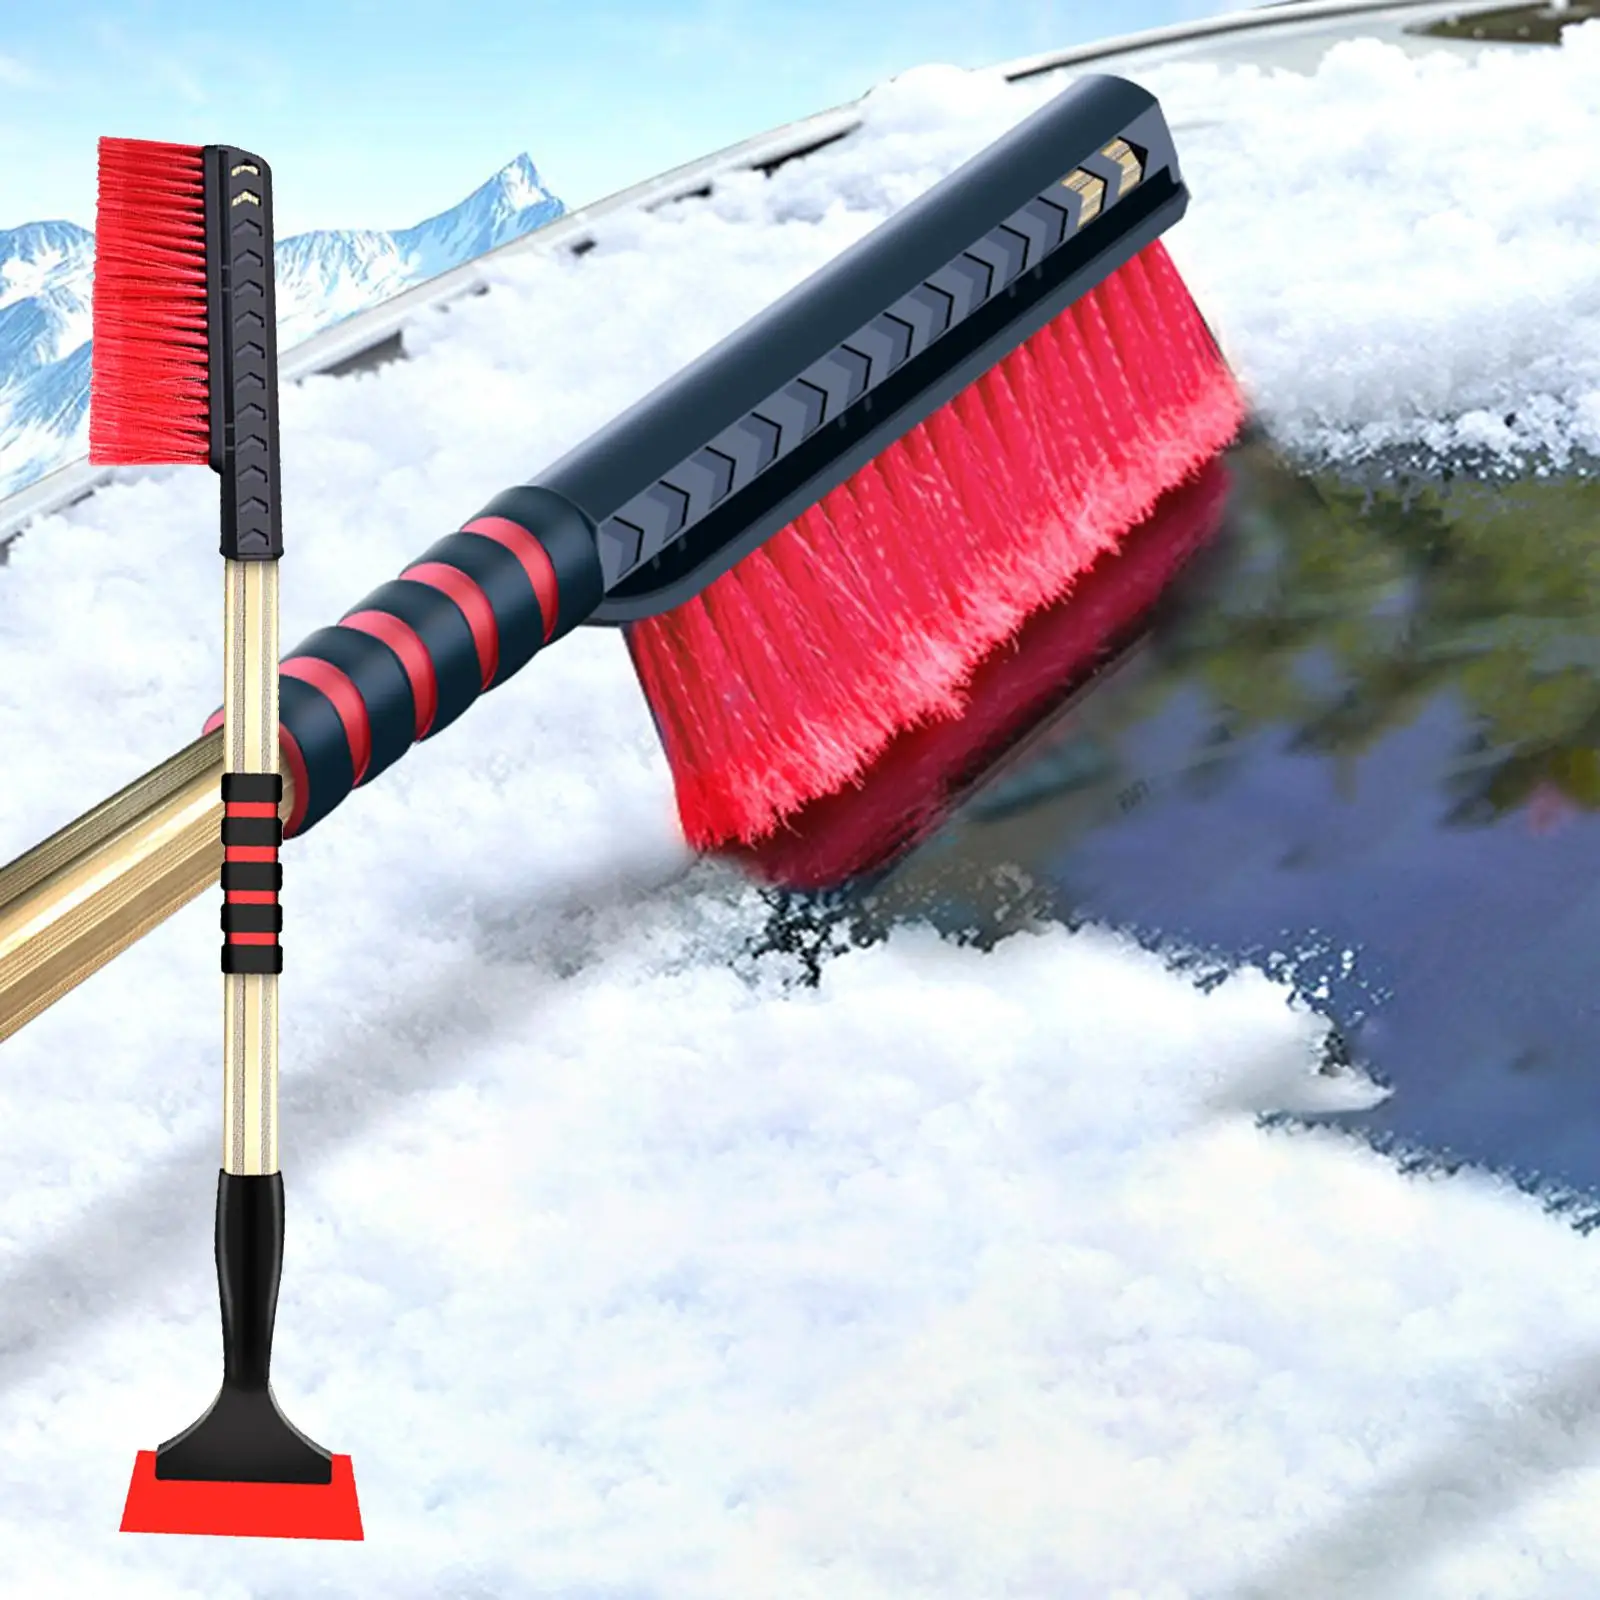 Professional Snow Removal Brush Tool Telescopic Handle Car Window Snow Cleaner Ice Snow Scraper for Truck SUV Vehicle Car